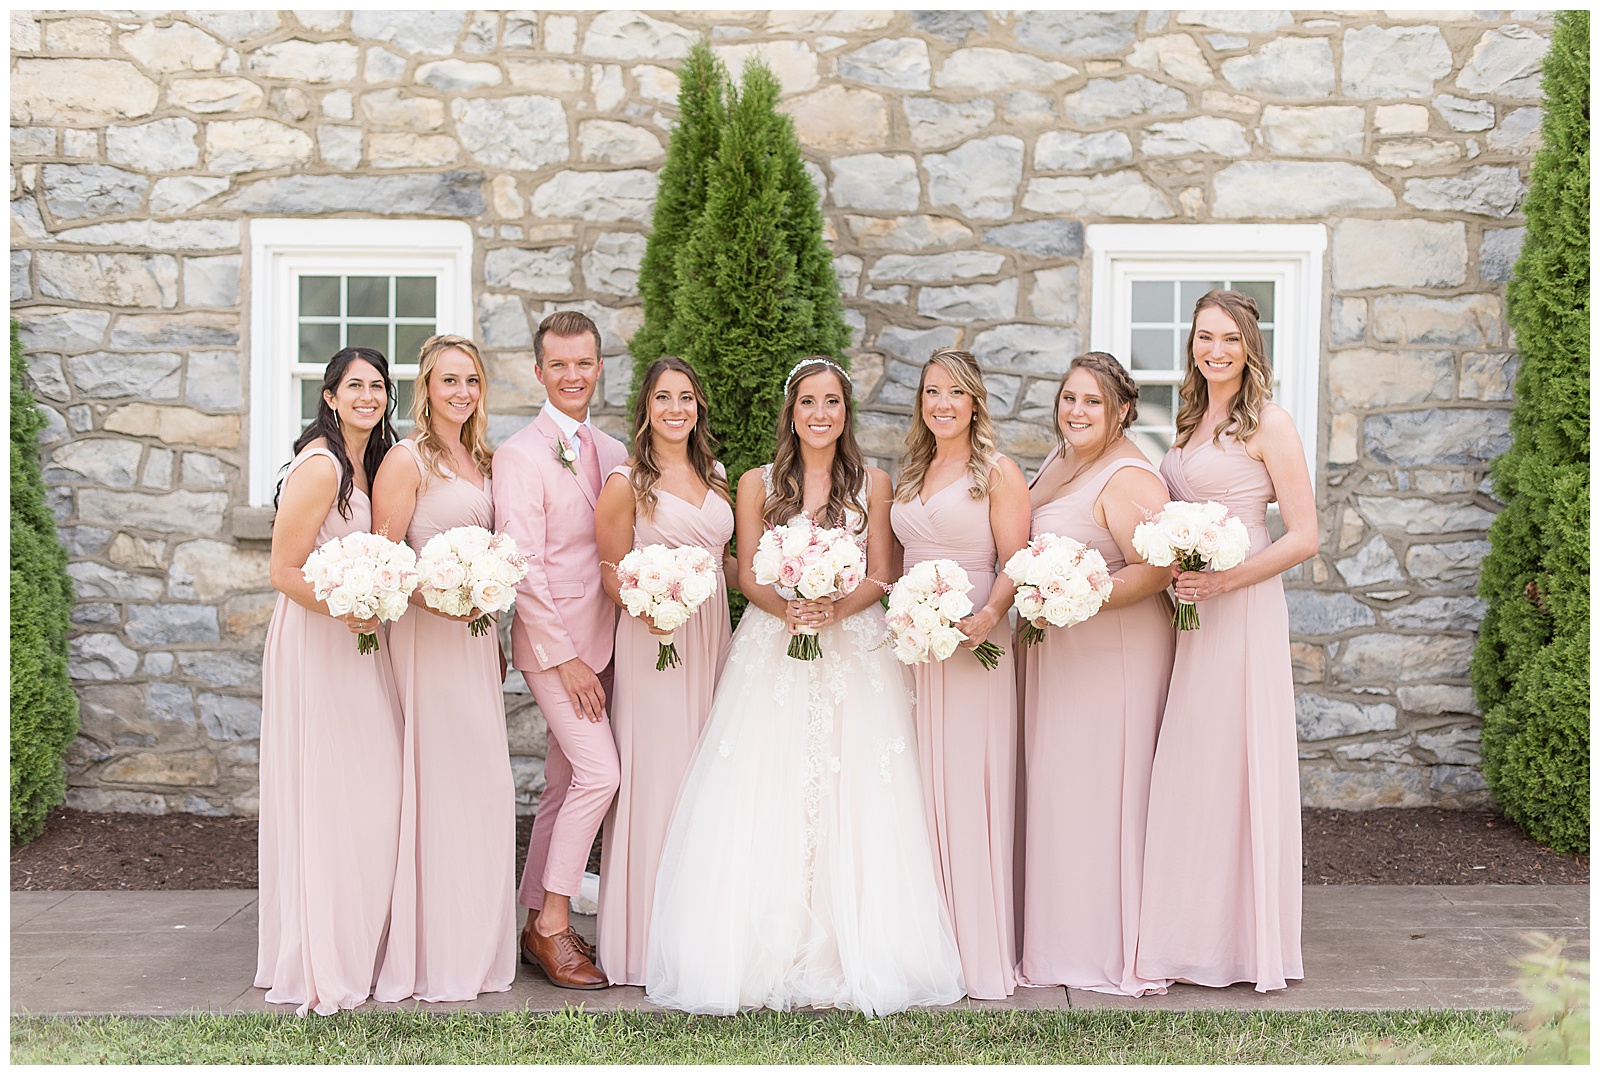 bridesmaids in light pink dresses with one bridesman in a light pink suit smiling beside bride